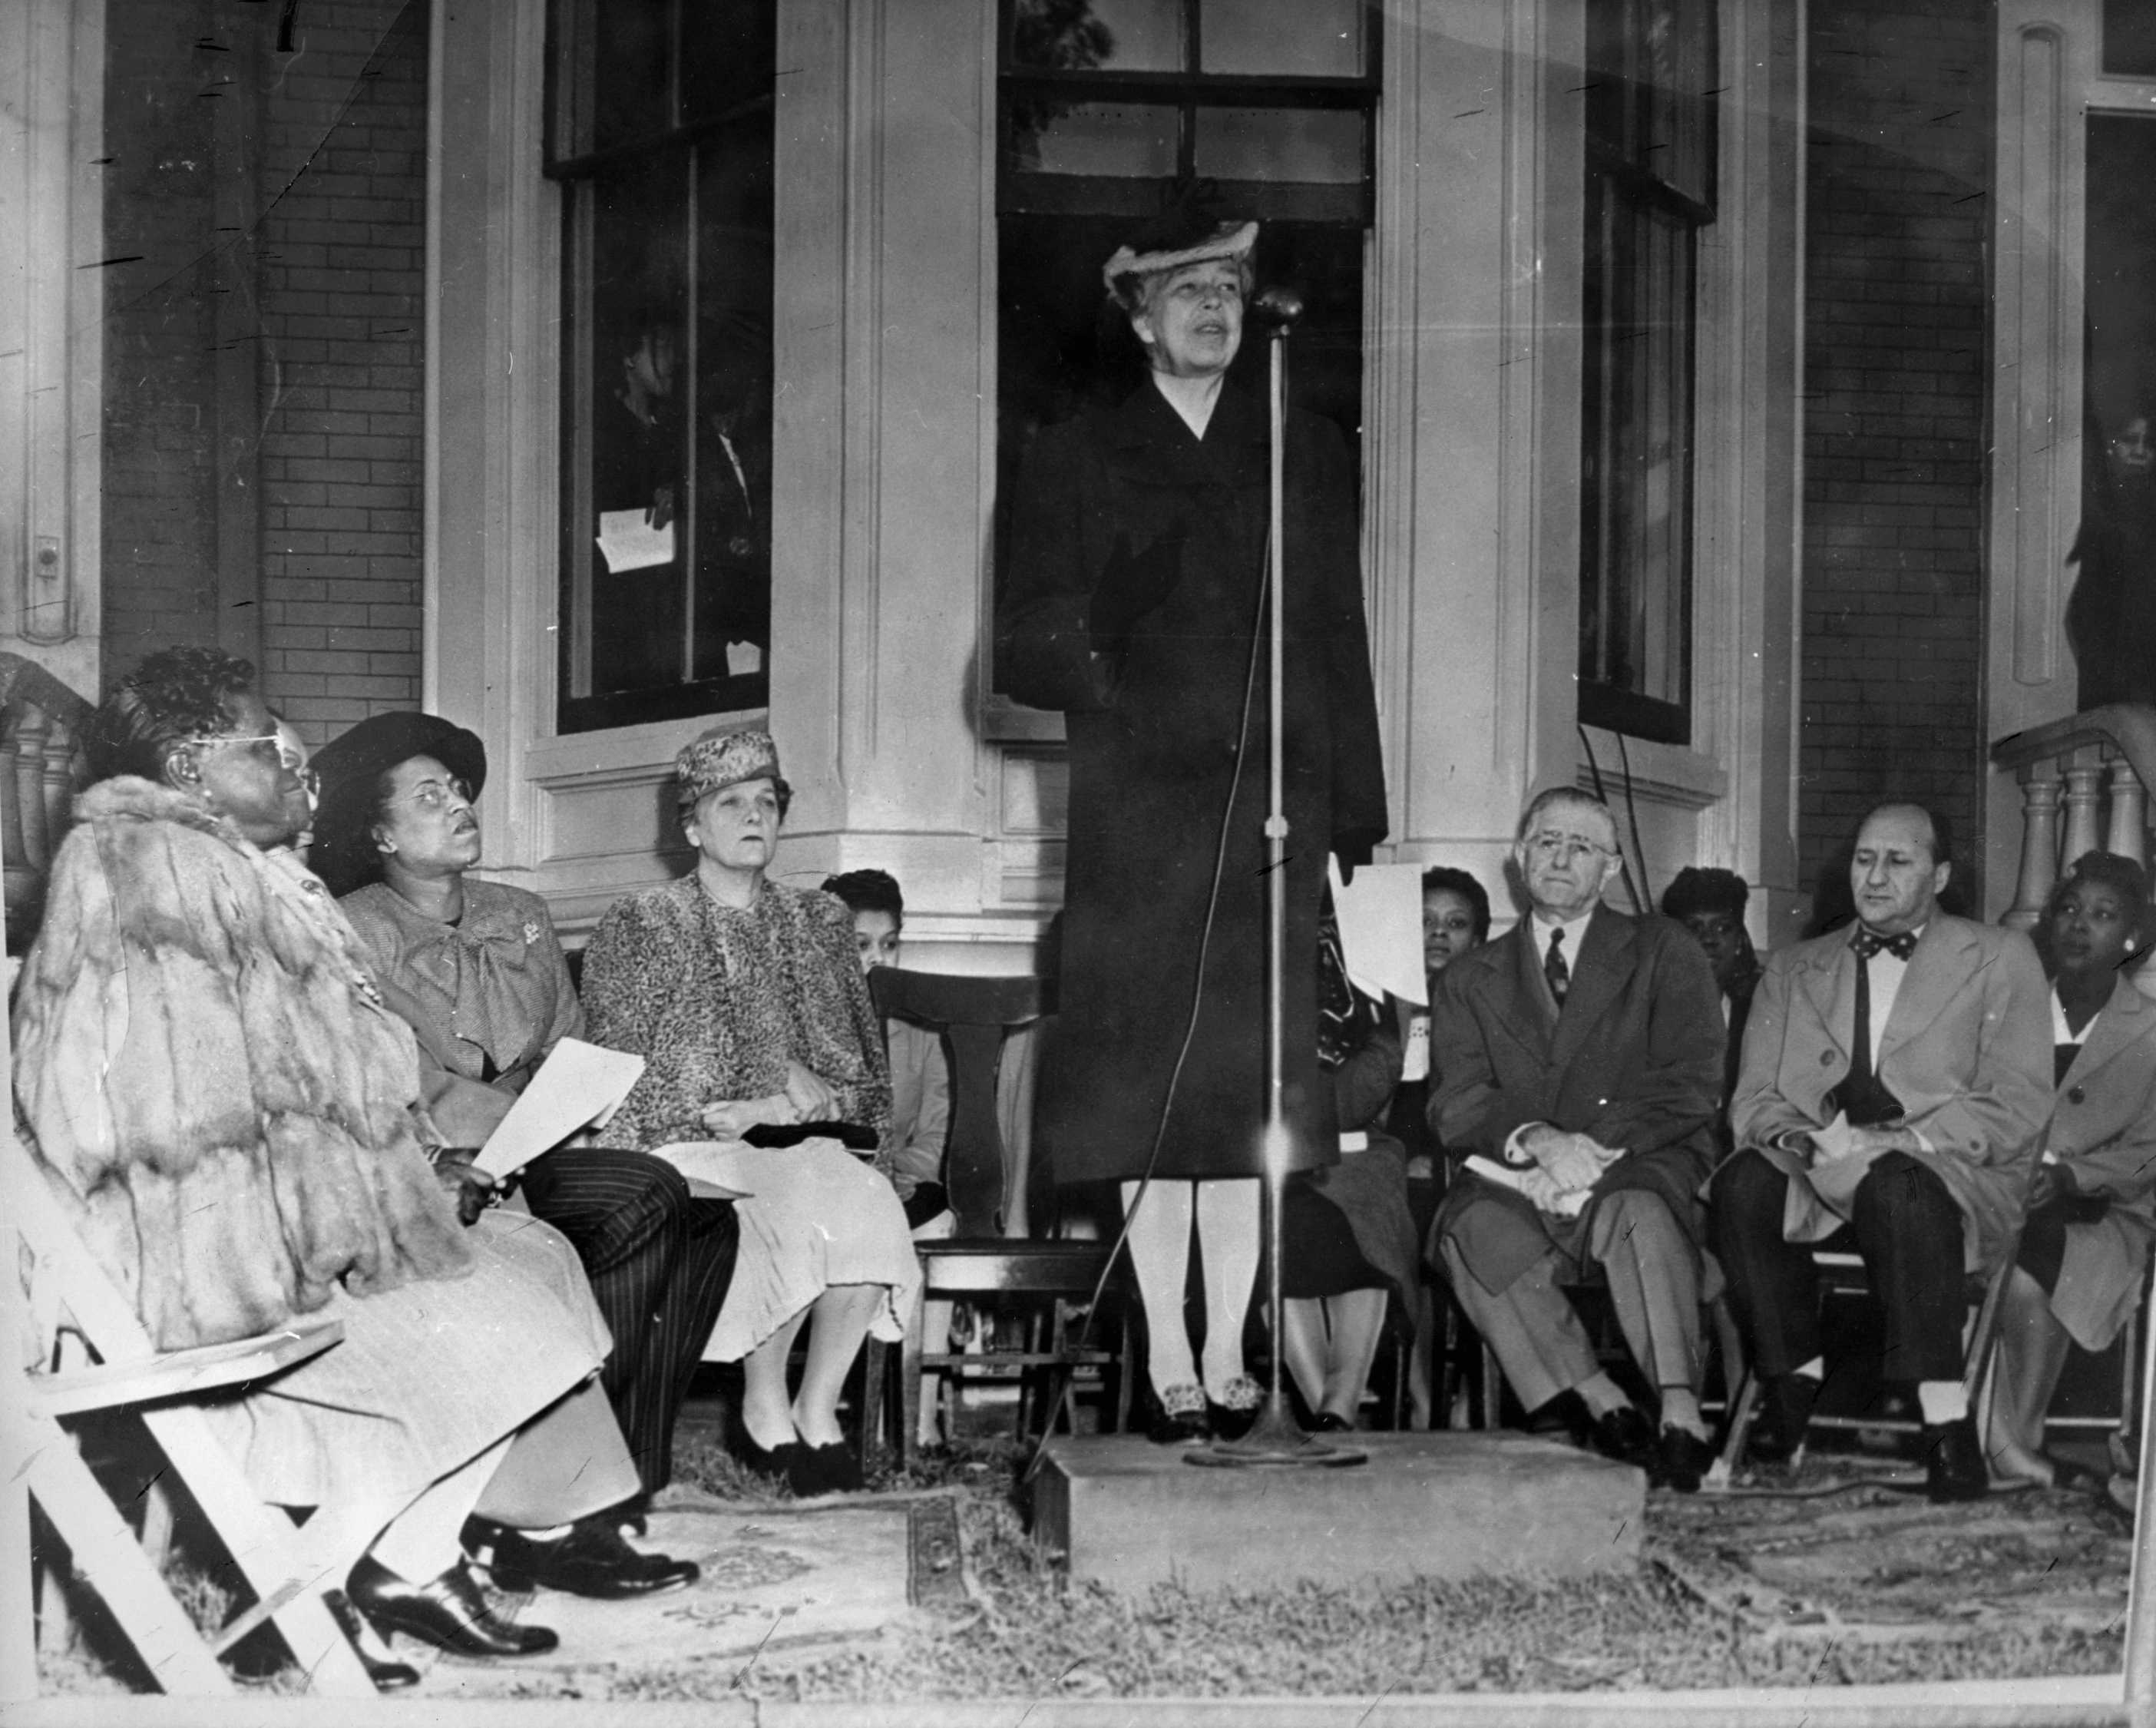 Photograph of Eleanor Roosevelt speaking at the Council House dedication